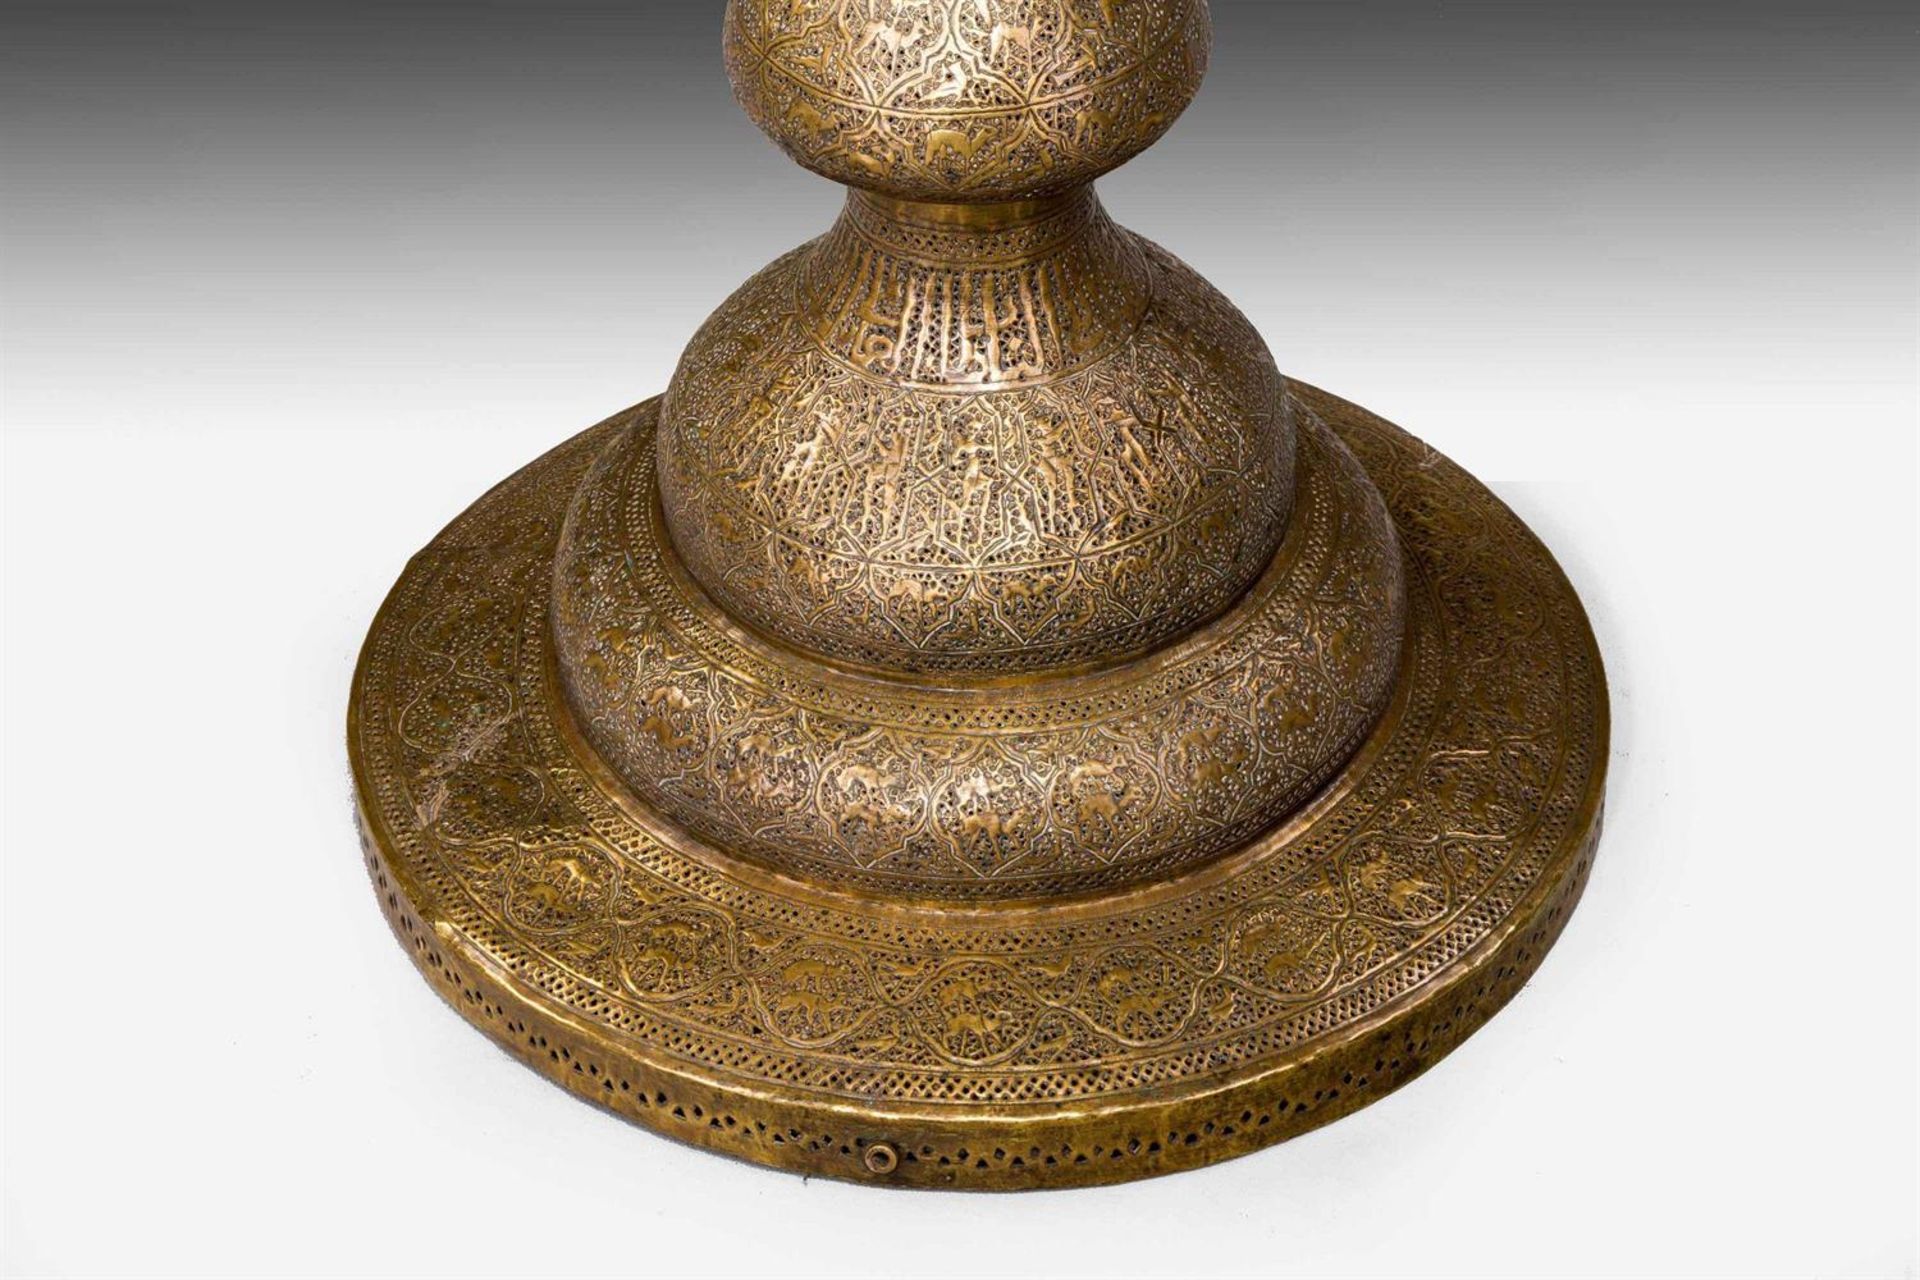 A BRASS STANDARD LAMP, 19TH/ 20TH CENTURY, SYRIA - Image 3 of 5